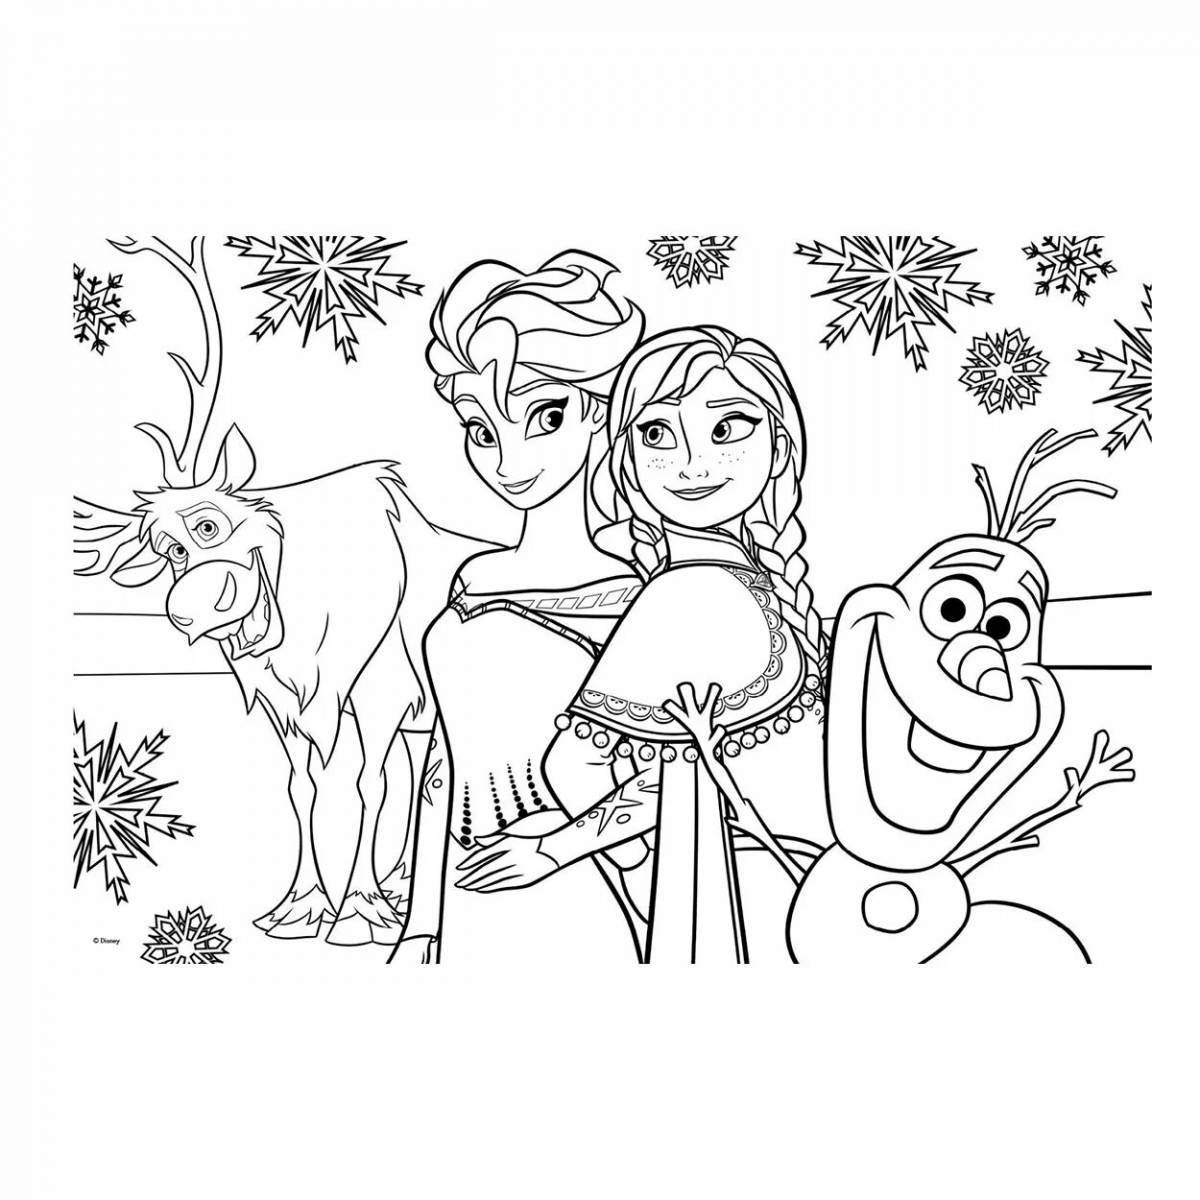 Coloring radiant anna and olaf